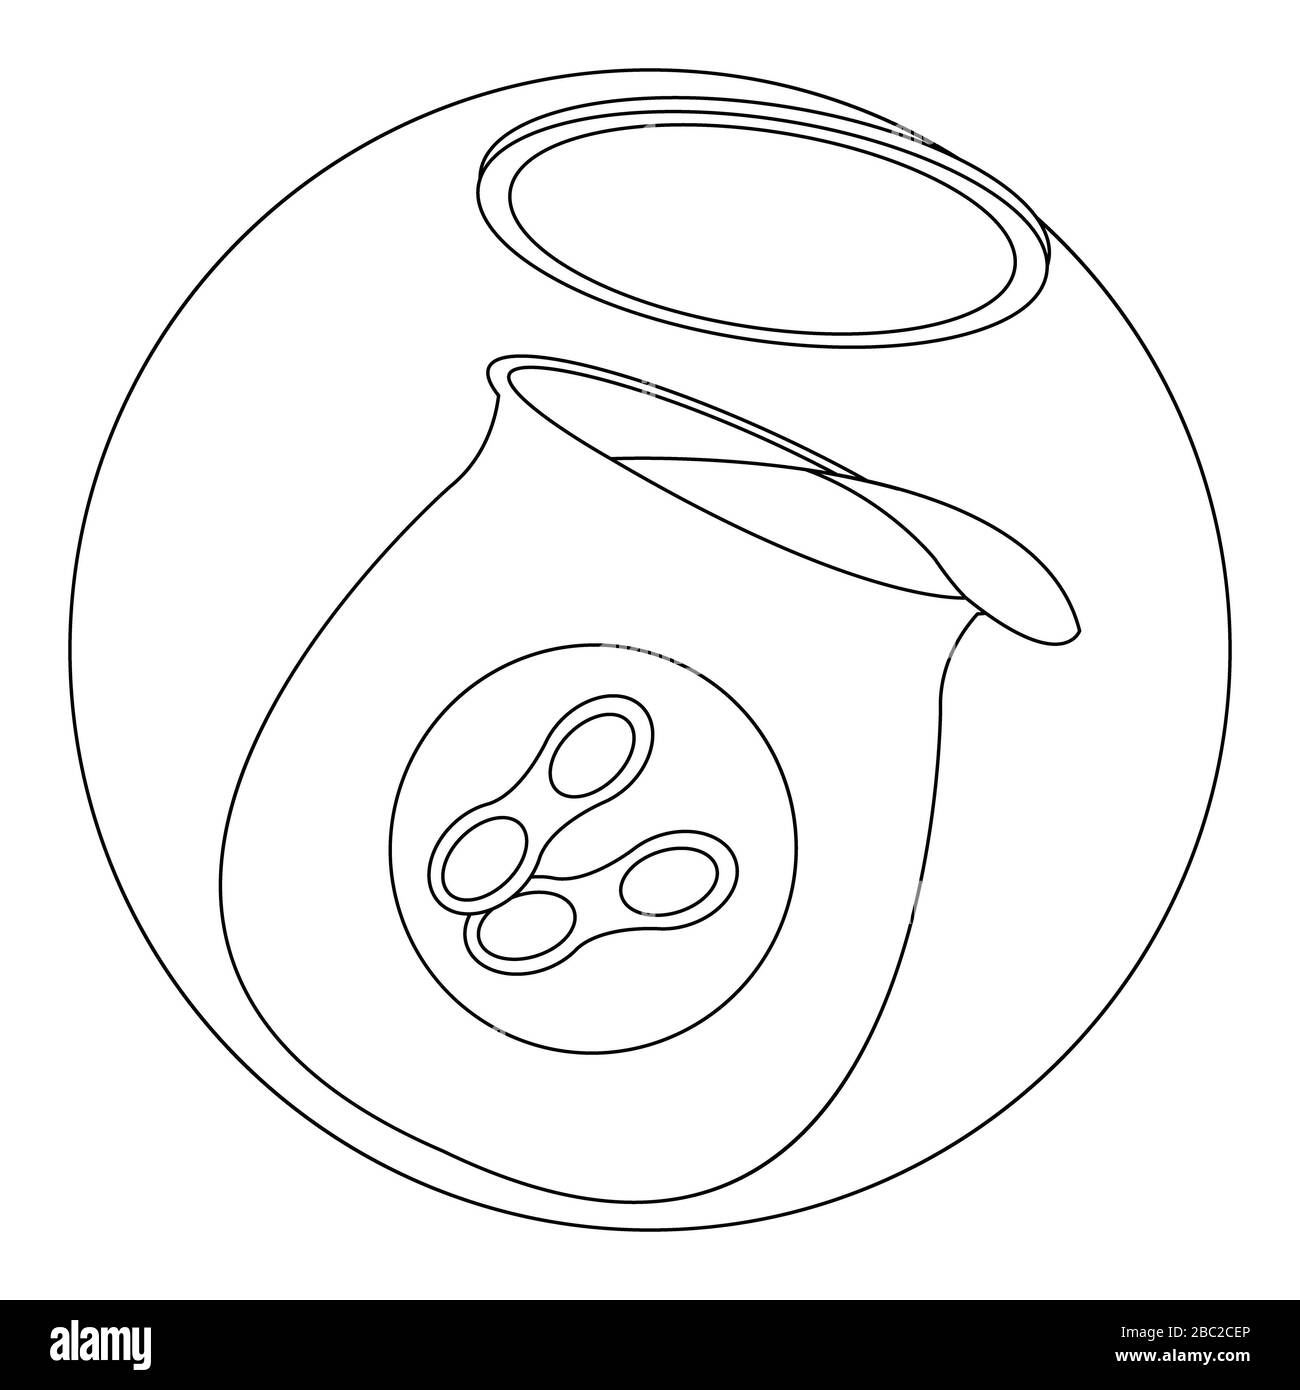 Peanut Butter Simple Line Art Illustration suitable for Coloring Book Stock Photo